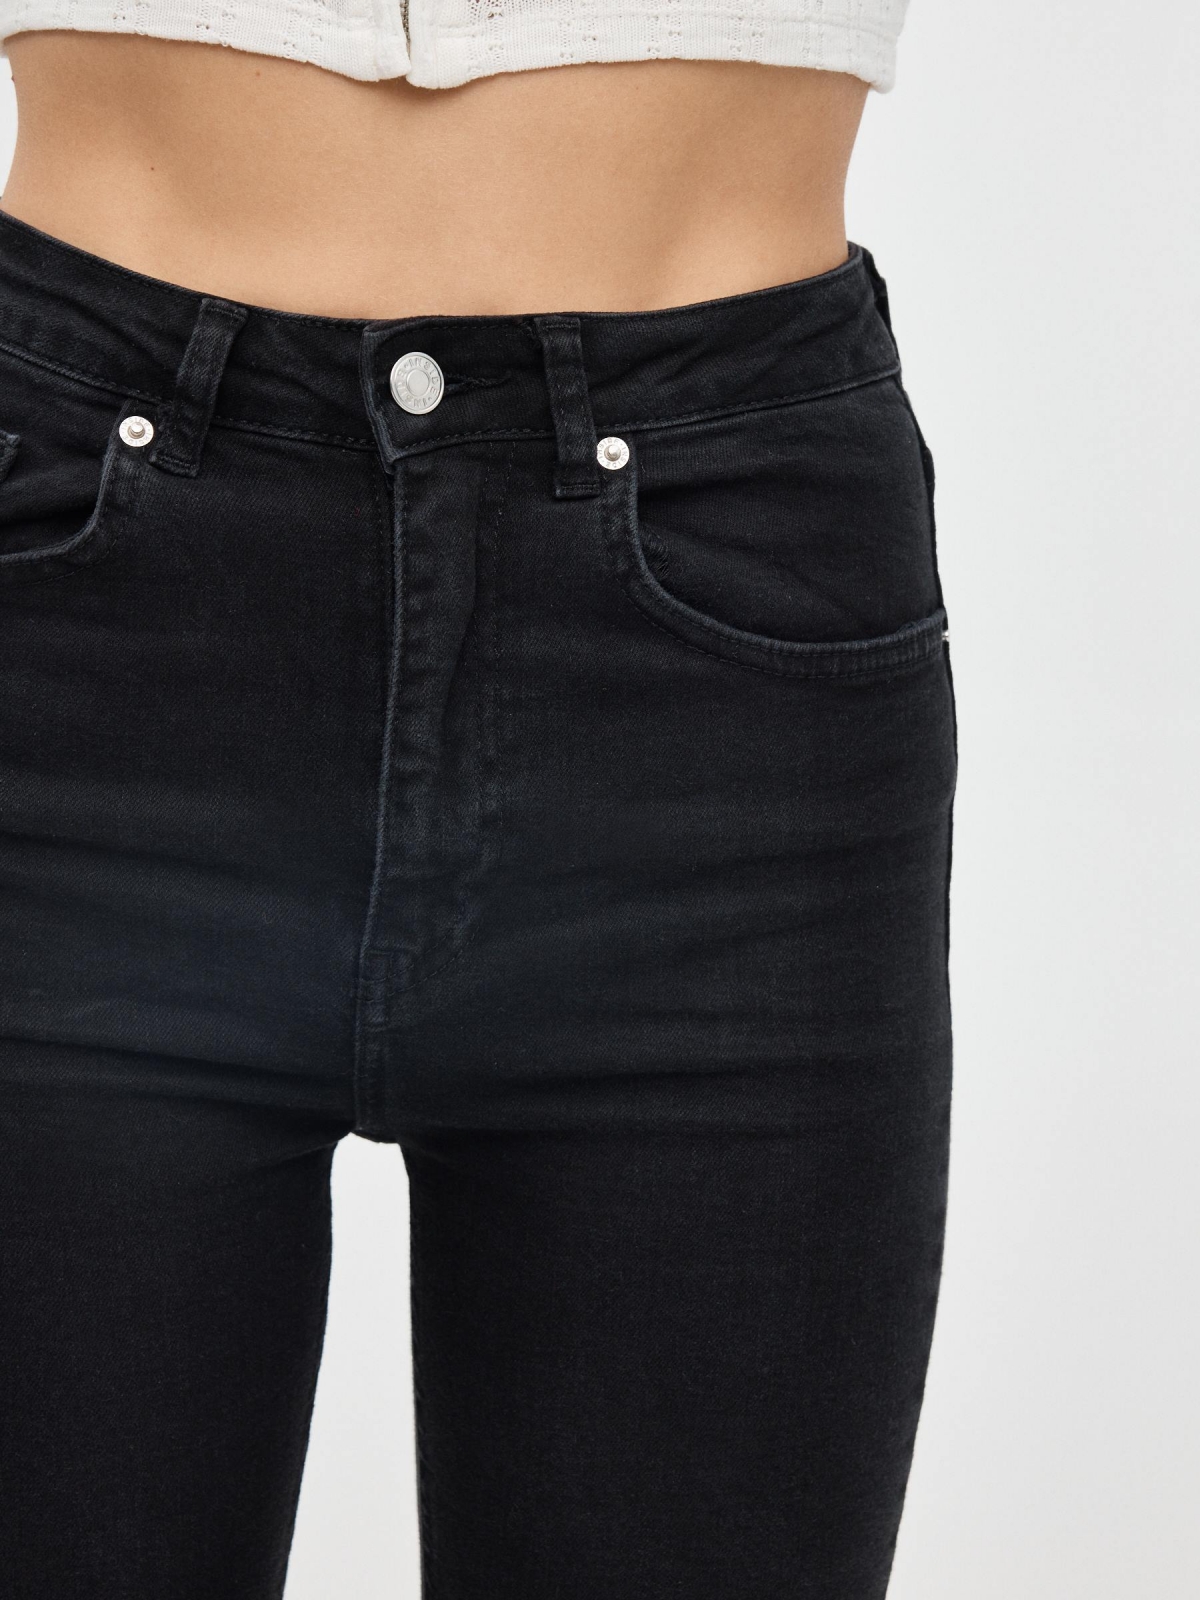 High rise skinny jeans black detail view